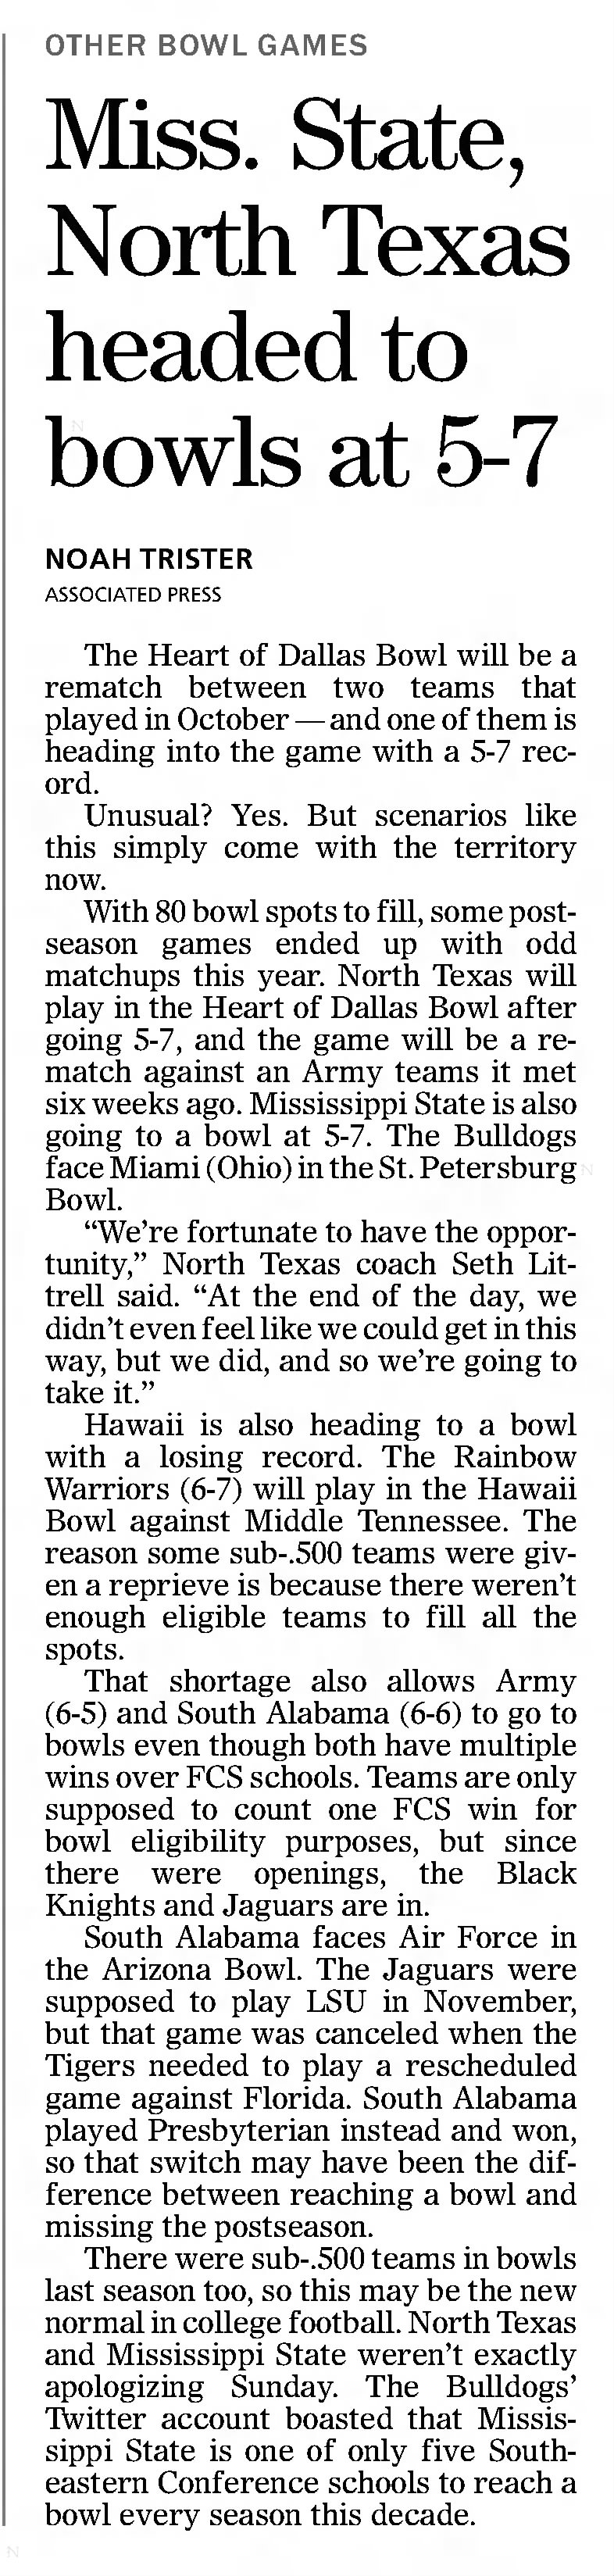 Miss. State, North Texas headed to bowls at 5-7